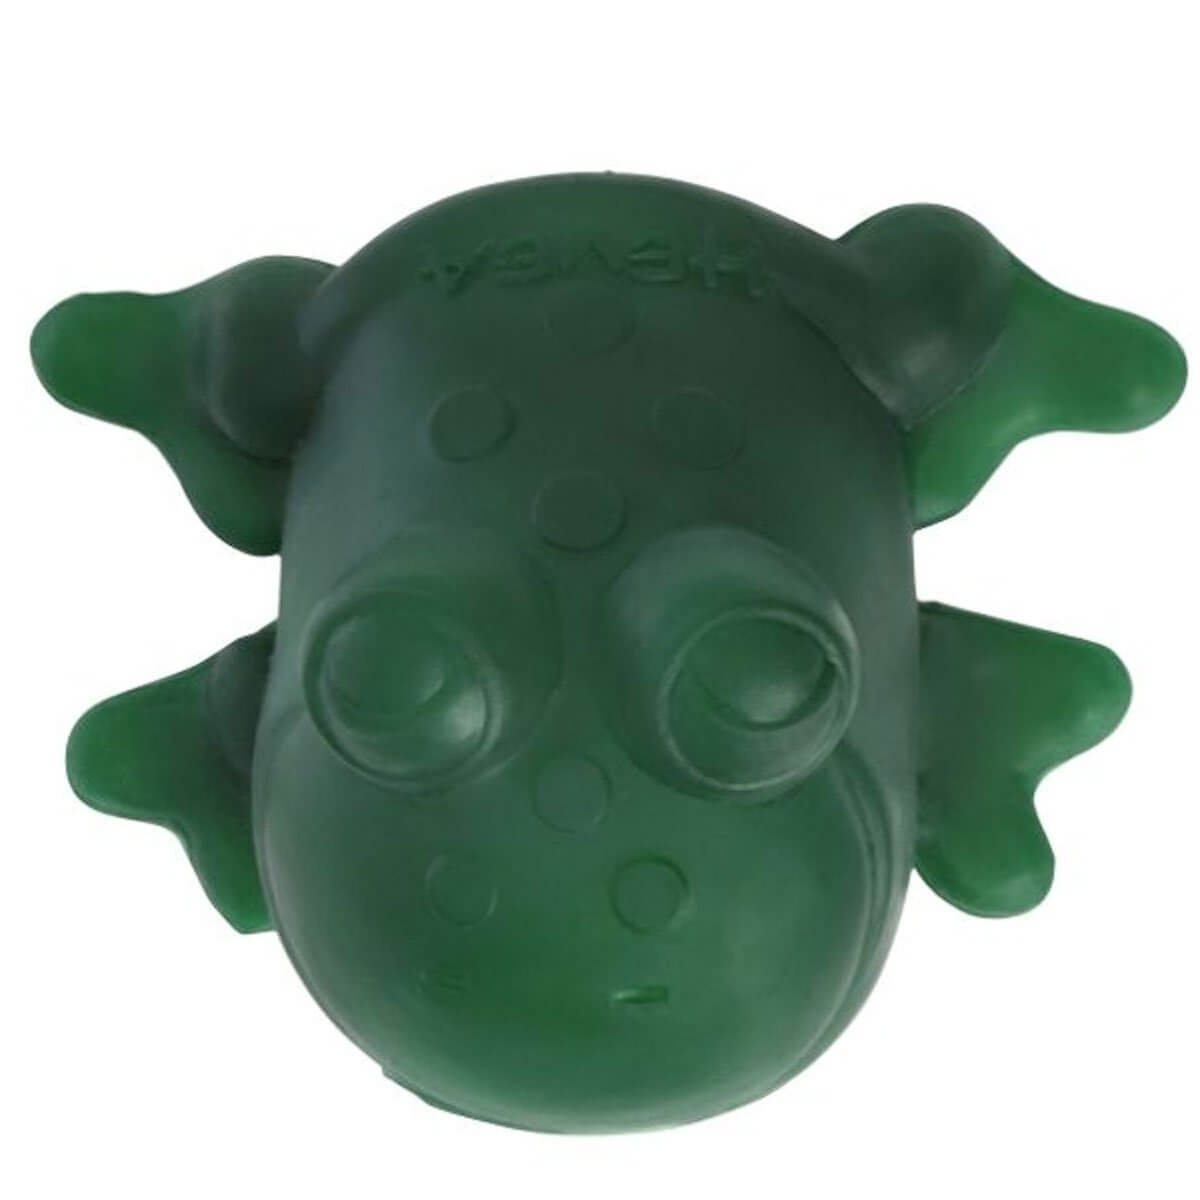 Fred the Green Frog - Natural Rubber Bath Toy - Hevea